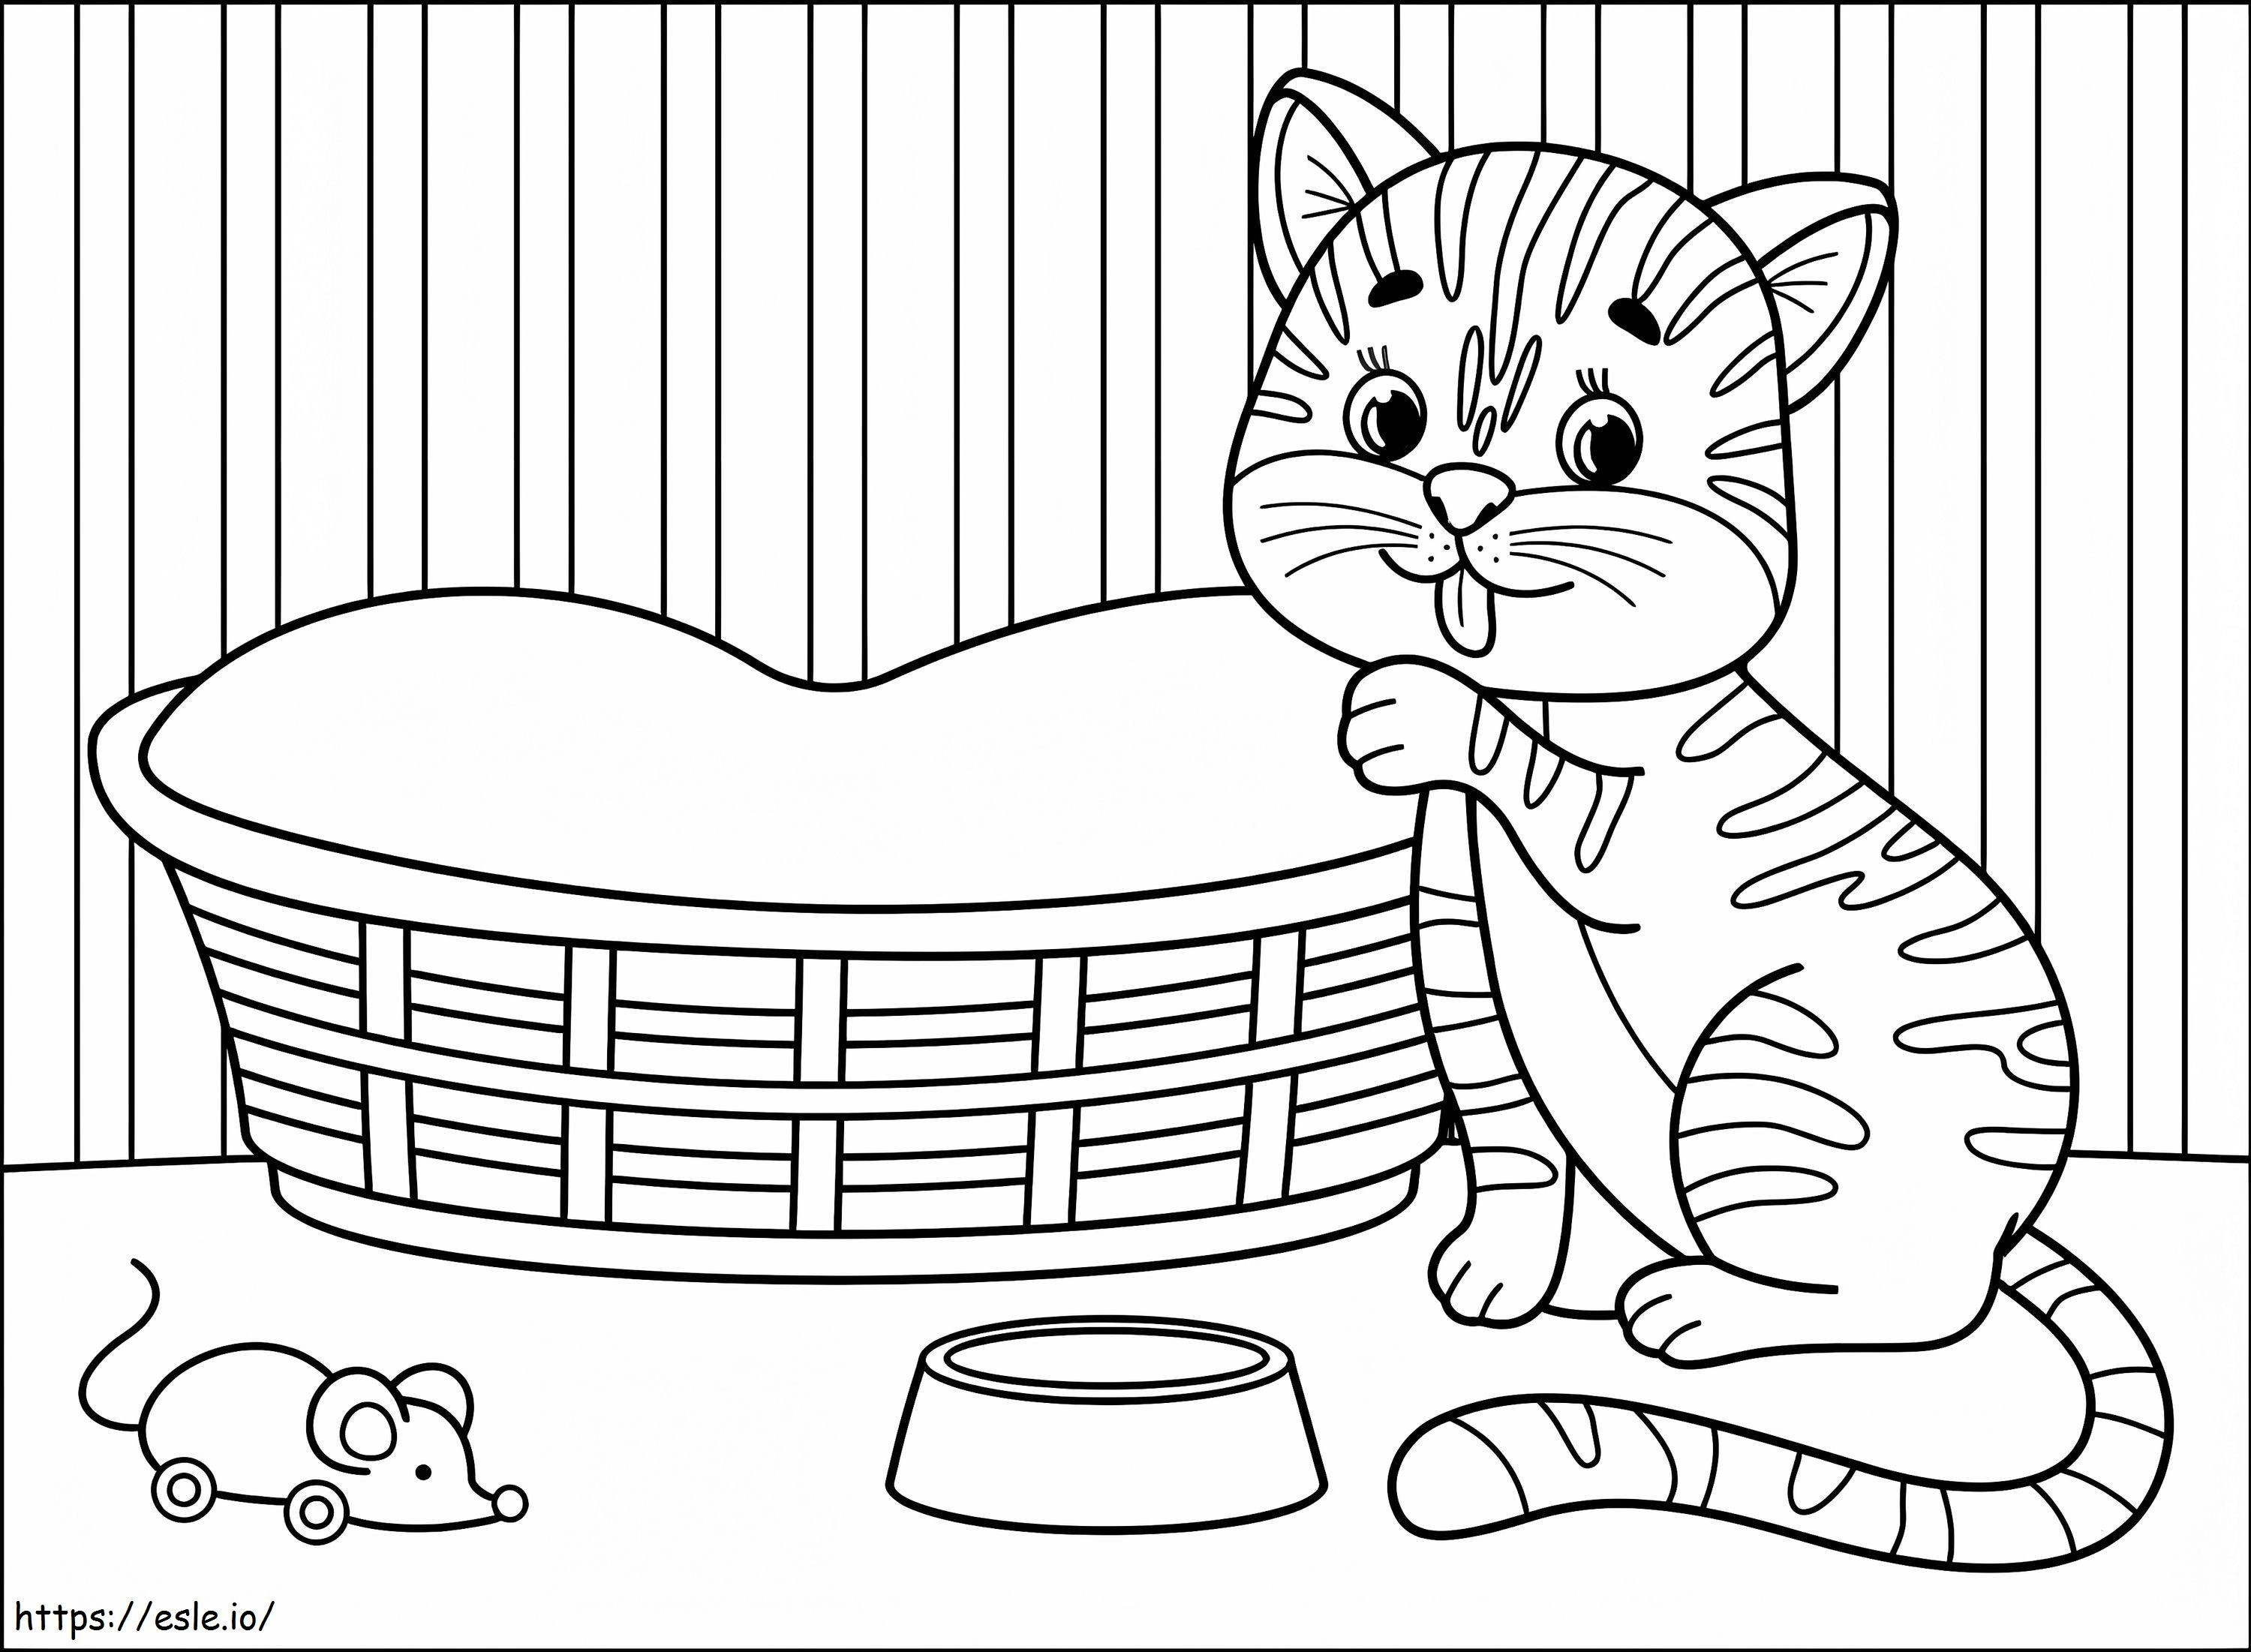 Printable Cartoon Cat coloring page